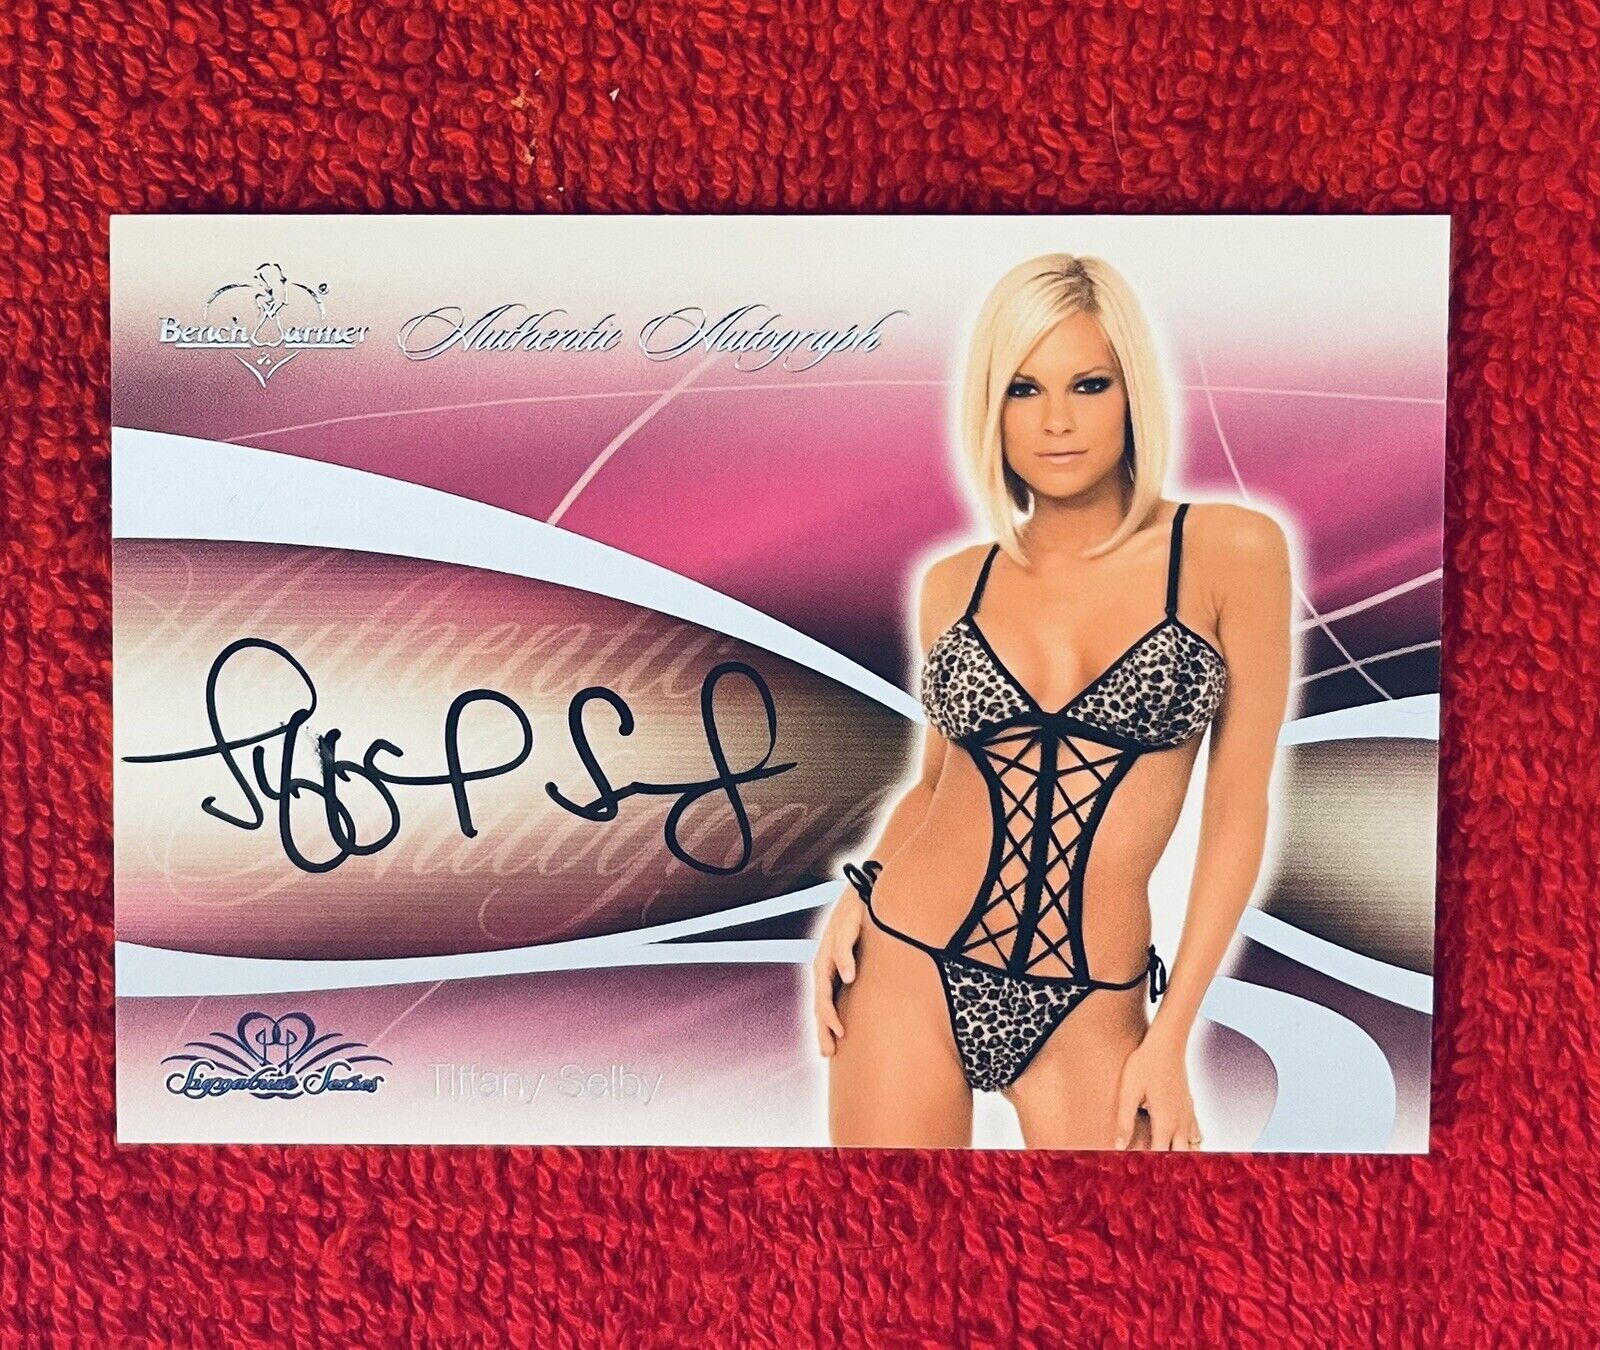 Tiffany Selby 2008 Autograph Benchwarmer Card Playboy Signature Series Auto 🔥